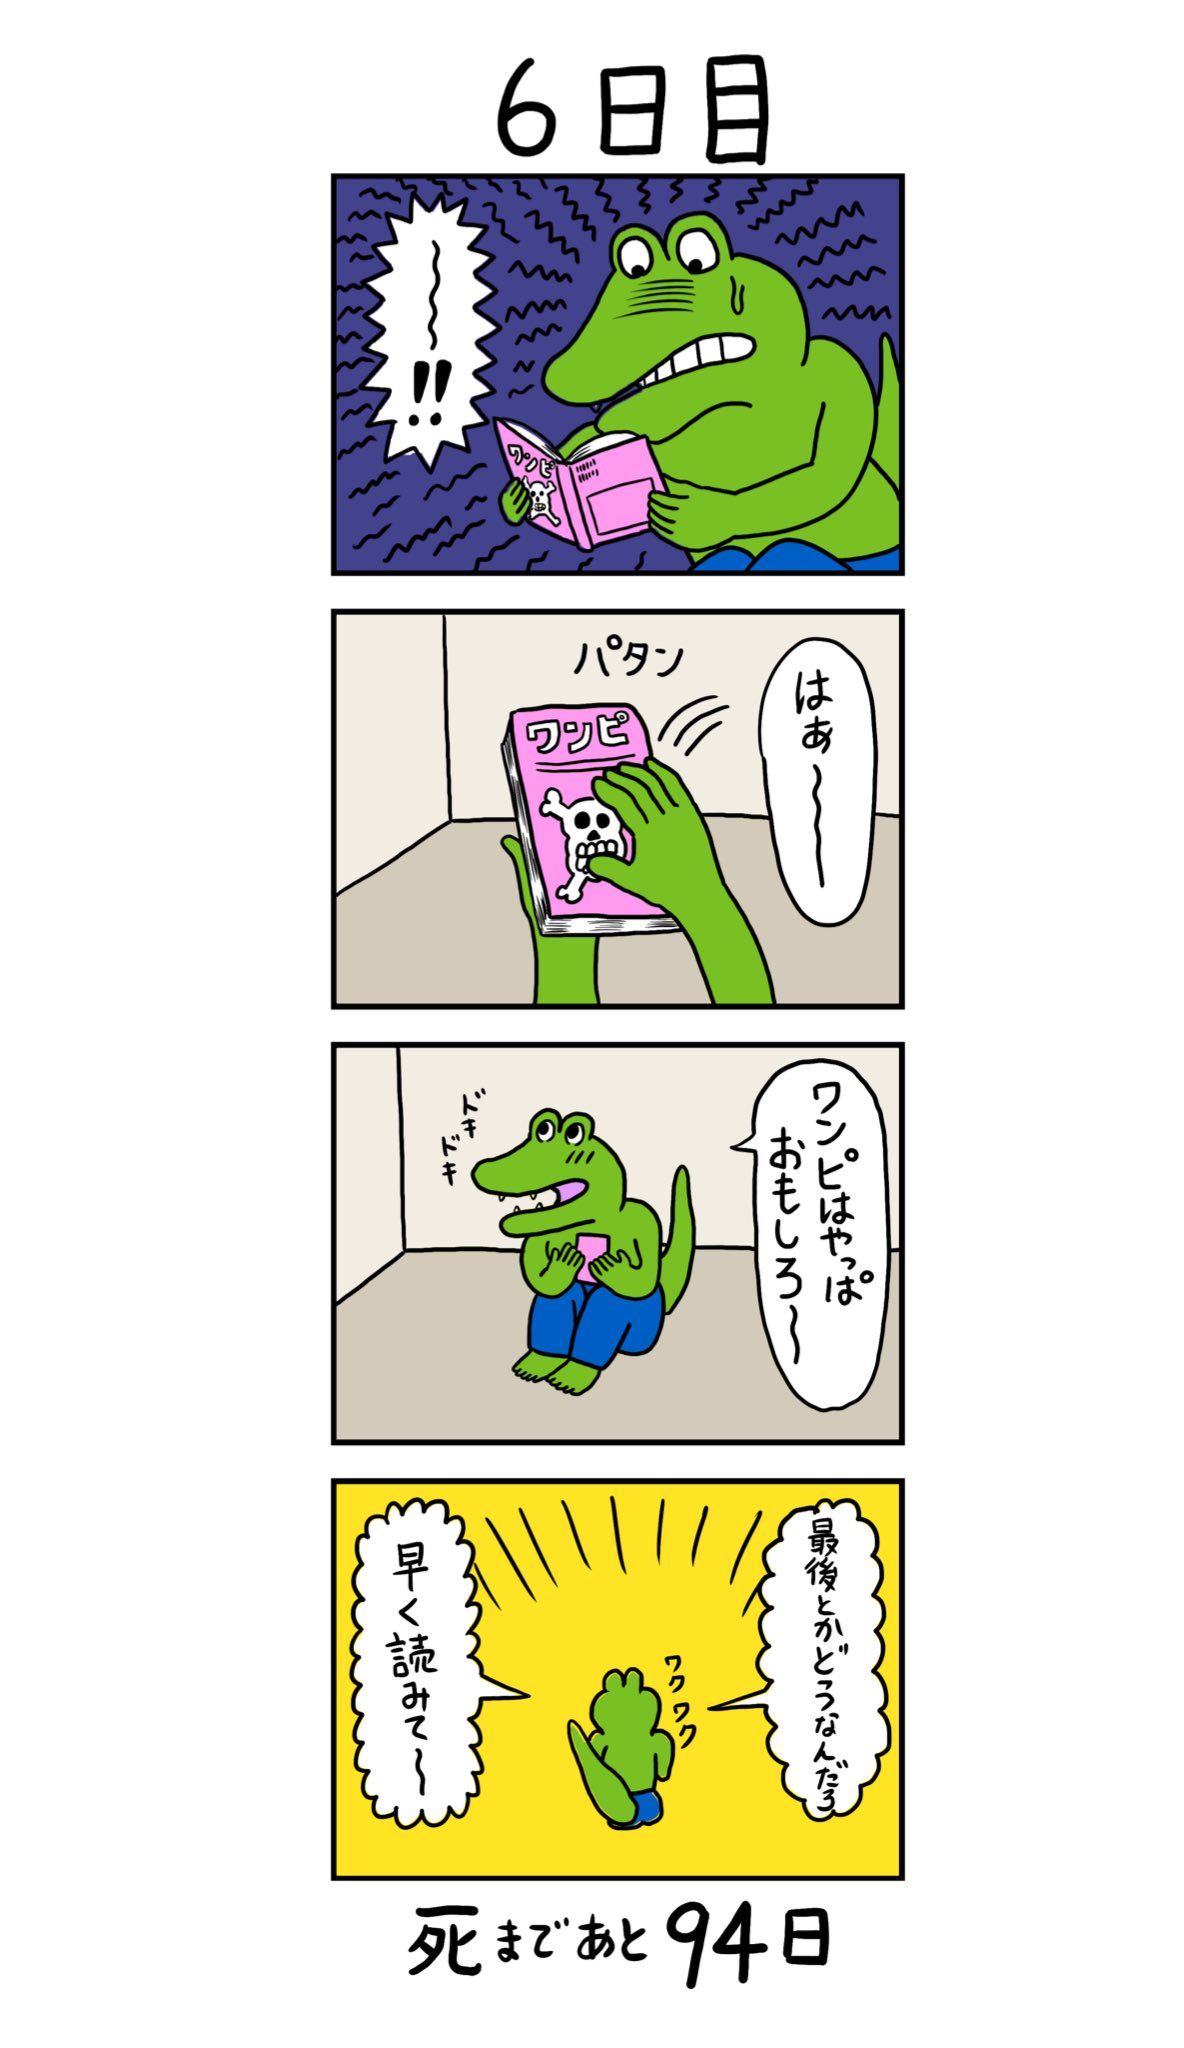 Tweets With Replies By 100日後に死ぬワニ Crocodile Dies Twitter